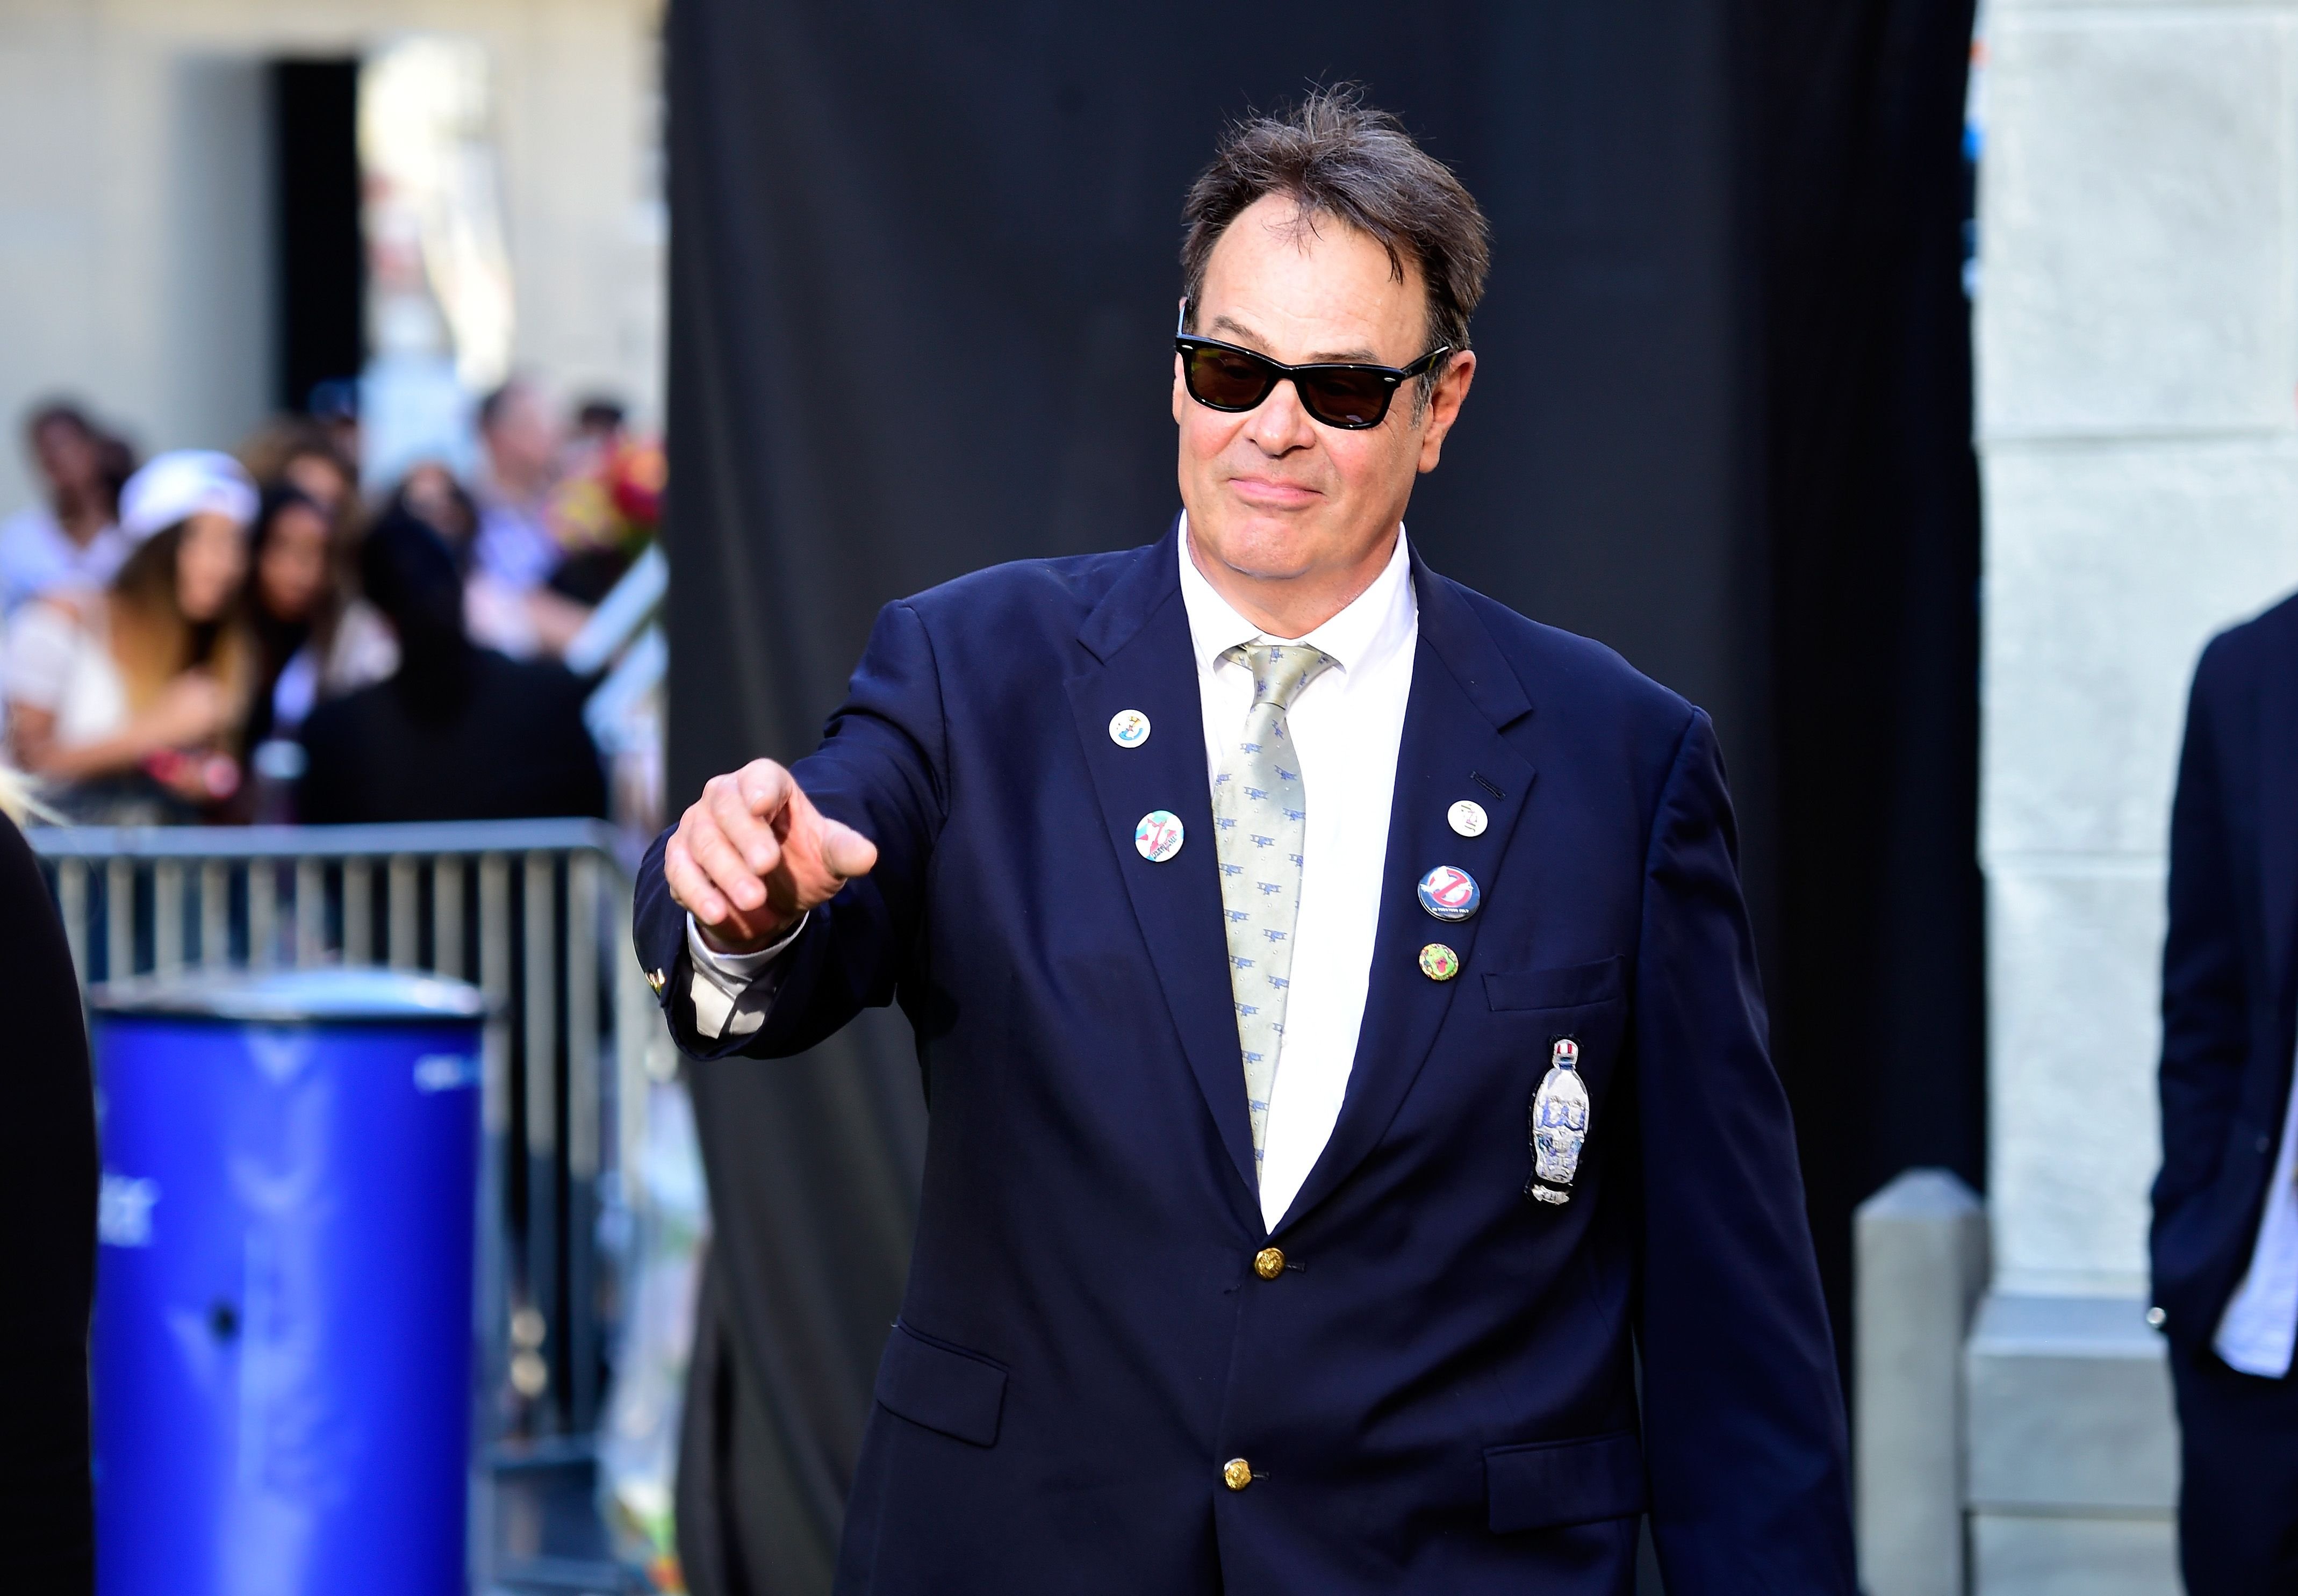 Dan Aykroyd at the premiere of Sony Pictures' "Ghostbusters" at TCL Chinese Theatre on July 9, 2016, in Hollywood, California | Photo: Frazer Harrison/Getty Images